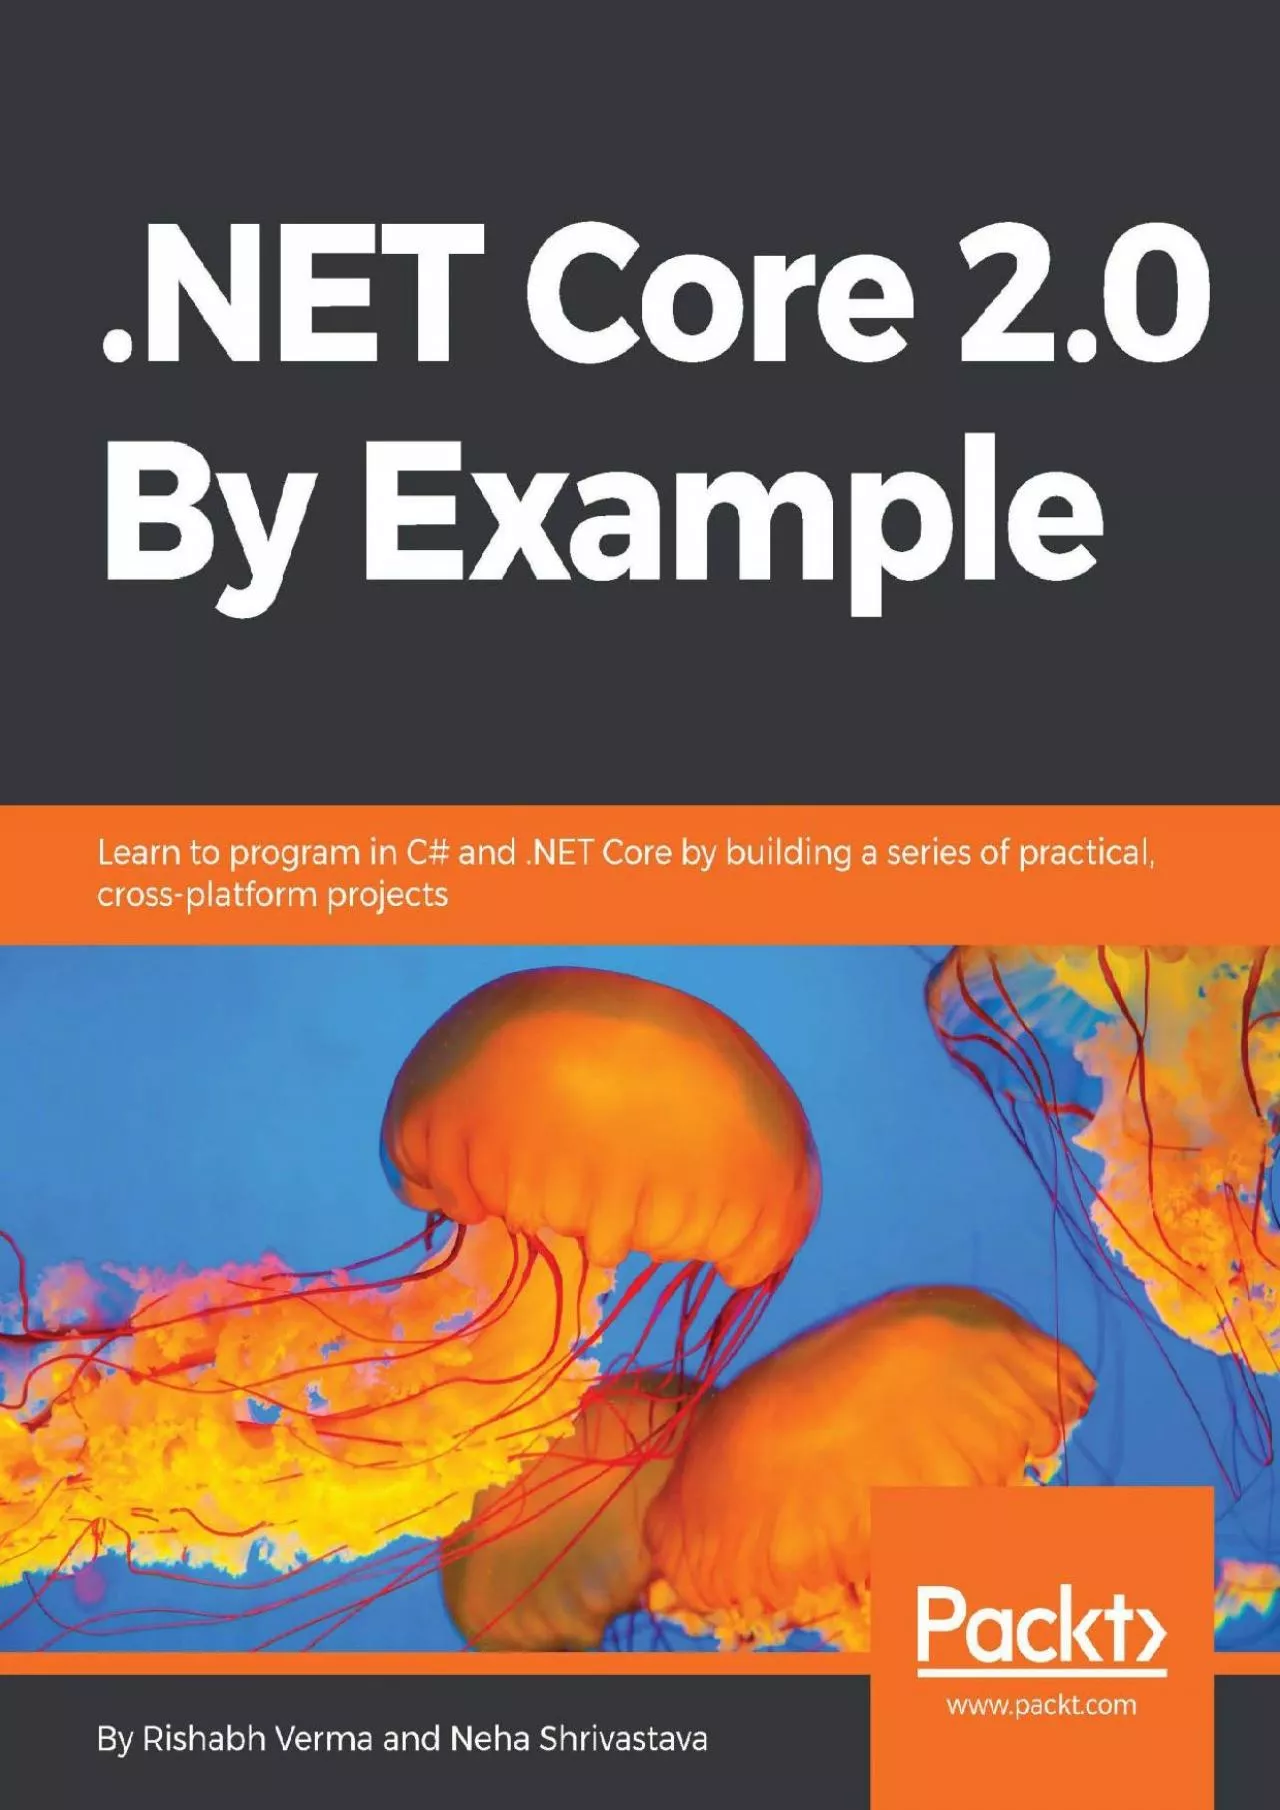 (DOWNLOAD)-.NET Core 2.0 By Example: Learn to program in C# and .NET Core by building